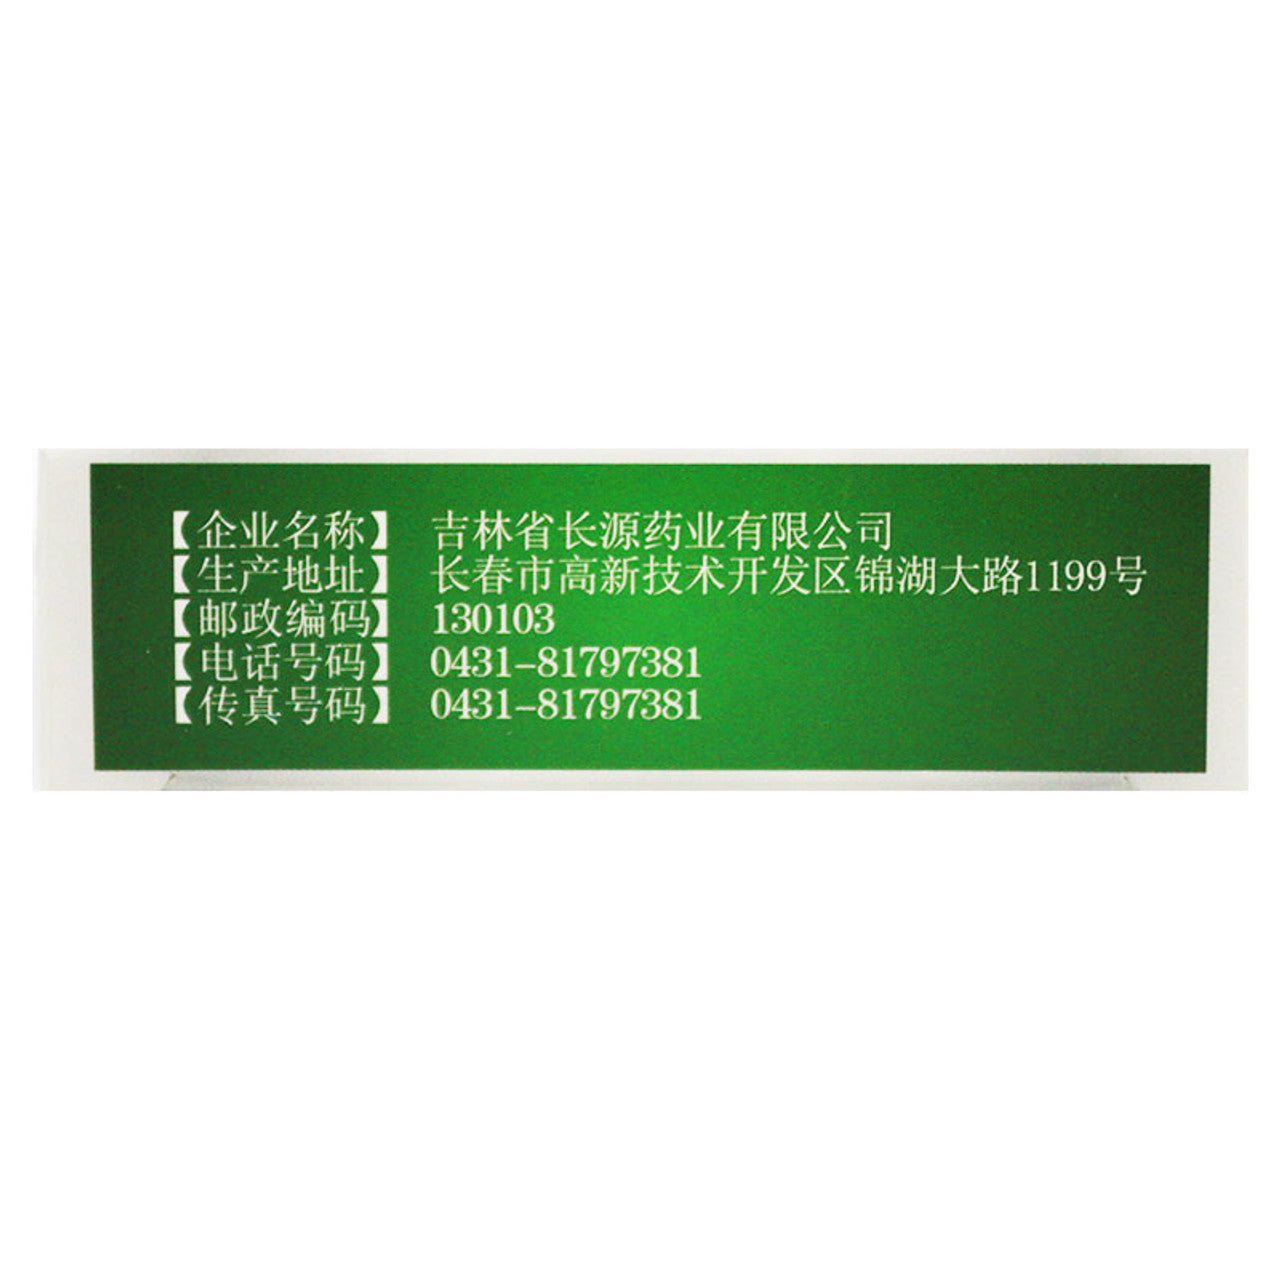 China Herb. Brand Changyuan. Naoshuan Kangfu Jiaonang or NaoshuanKangfuJiaonang or Nao Shuan Kang Fu Jiao Nang or Naoshuan Kangfu Capsules For stroke caused by blood stasis and obstruction of collaterals